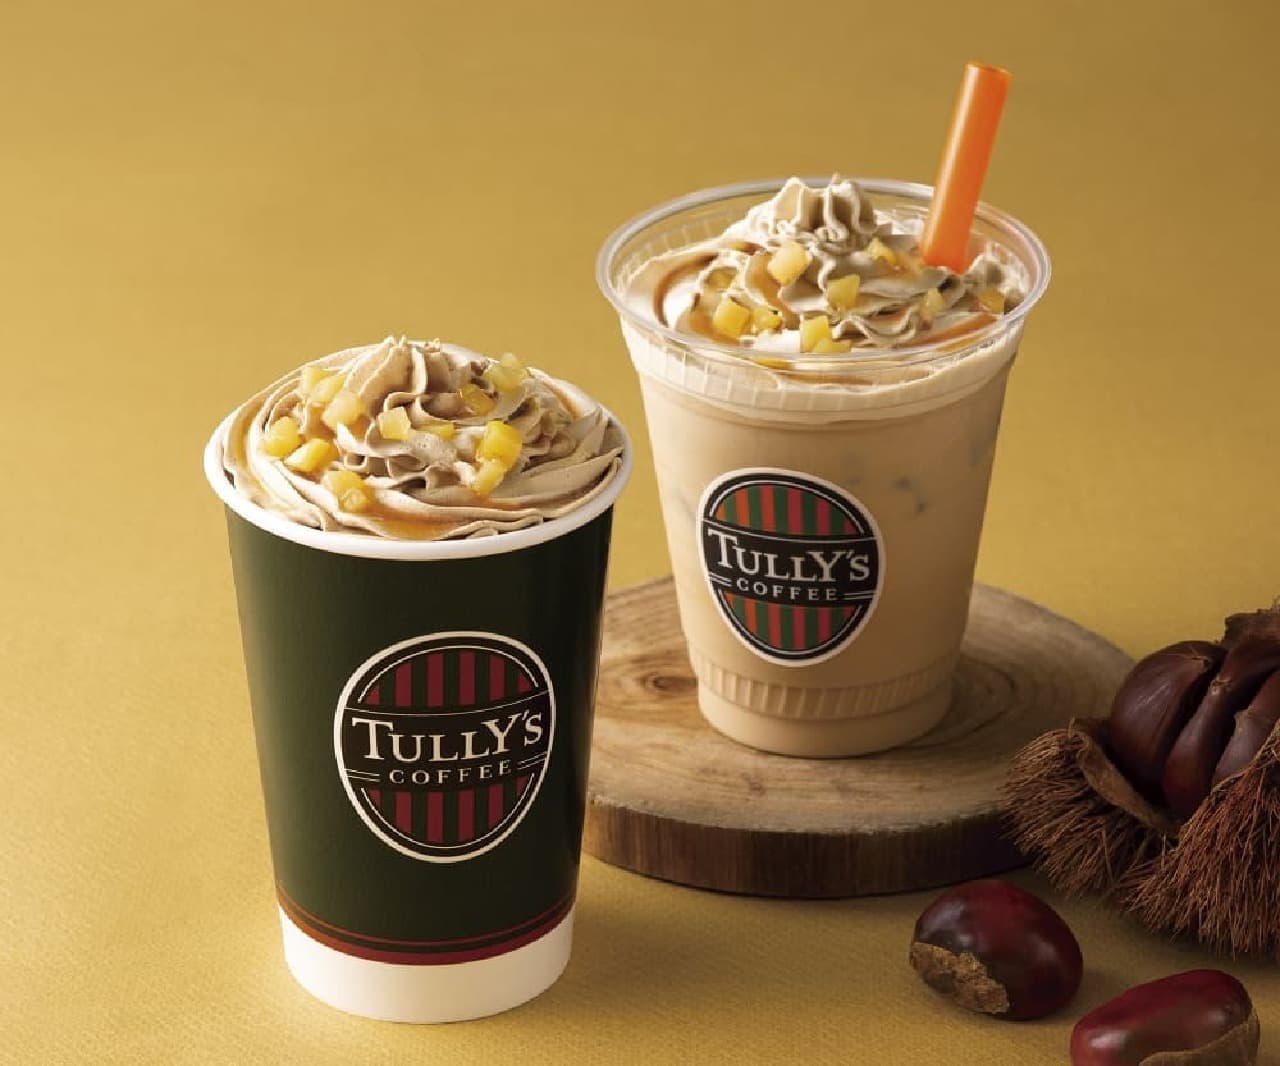 Tully's Coffee "Japanese Chestnut Mont Blanc Latte